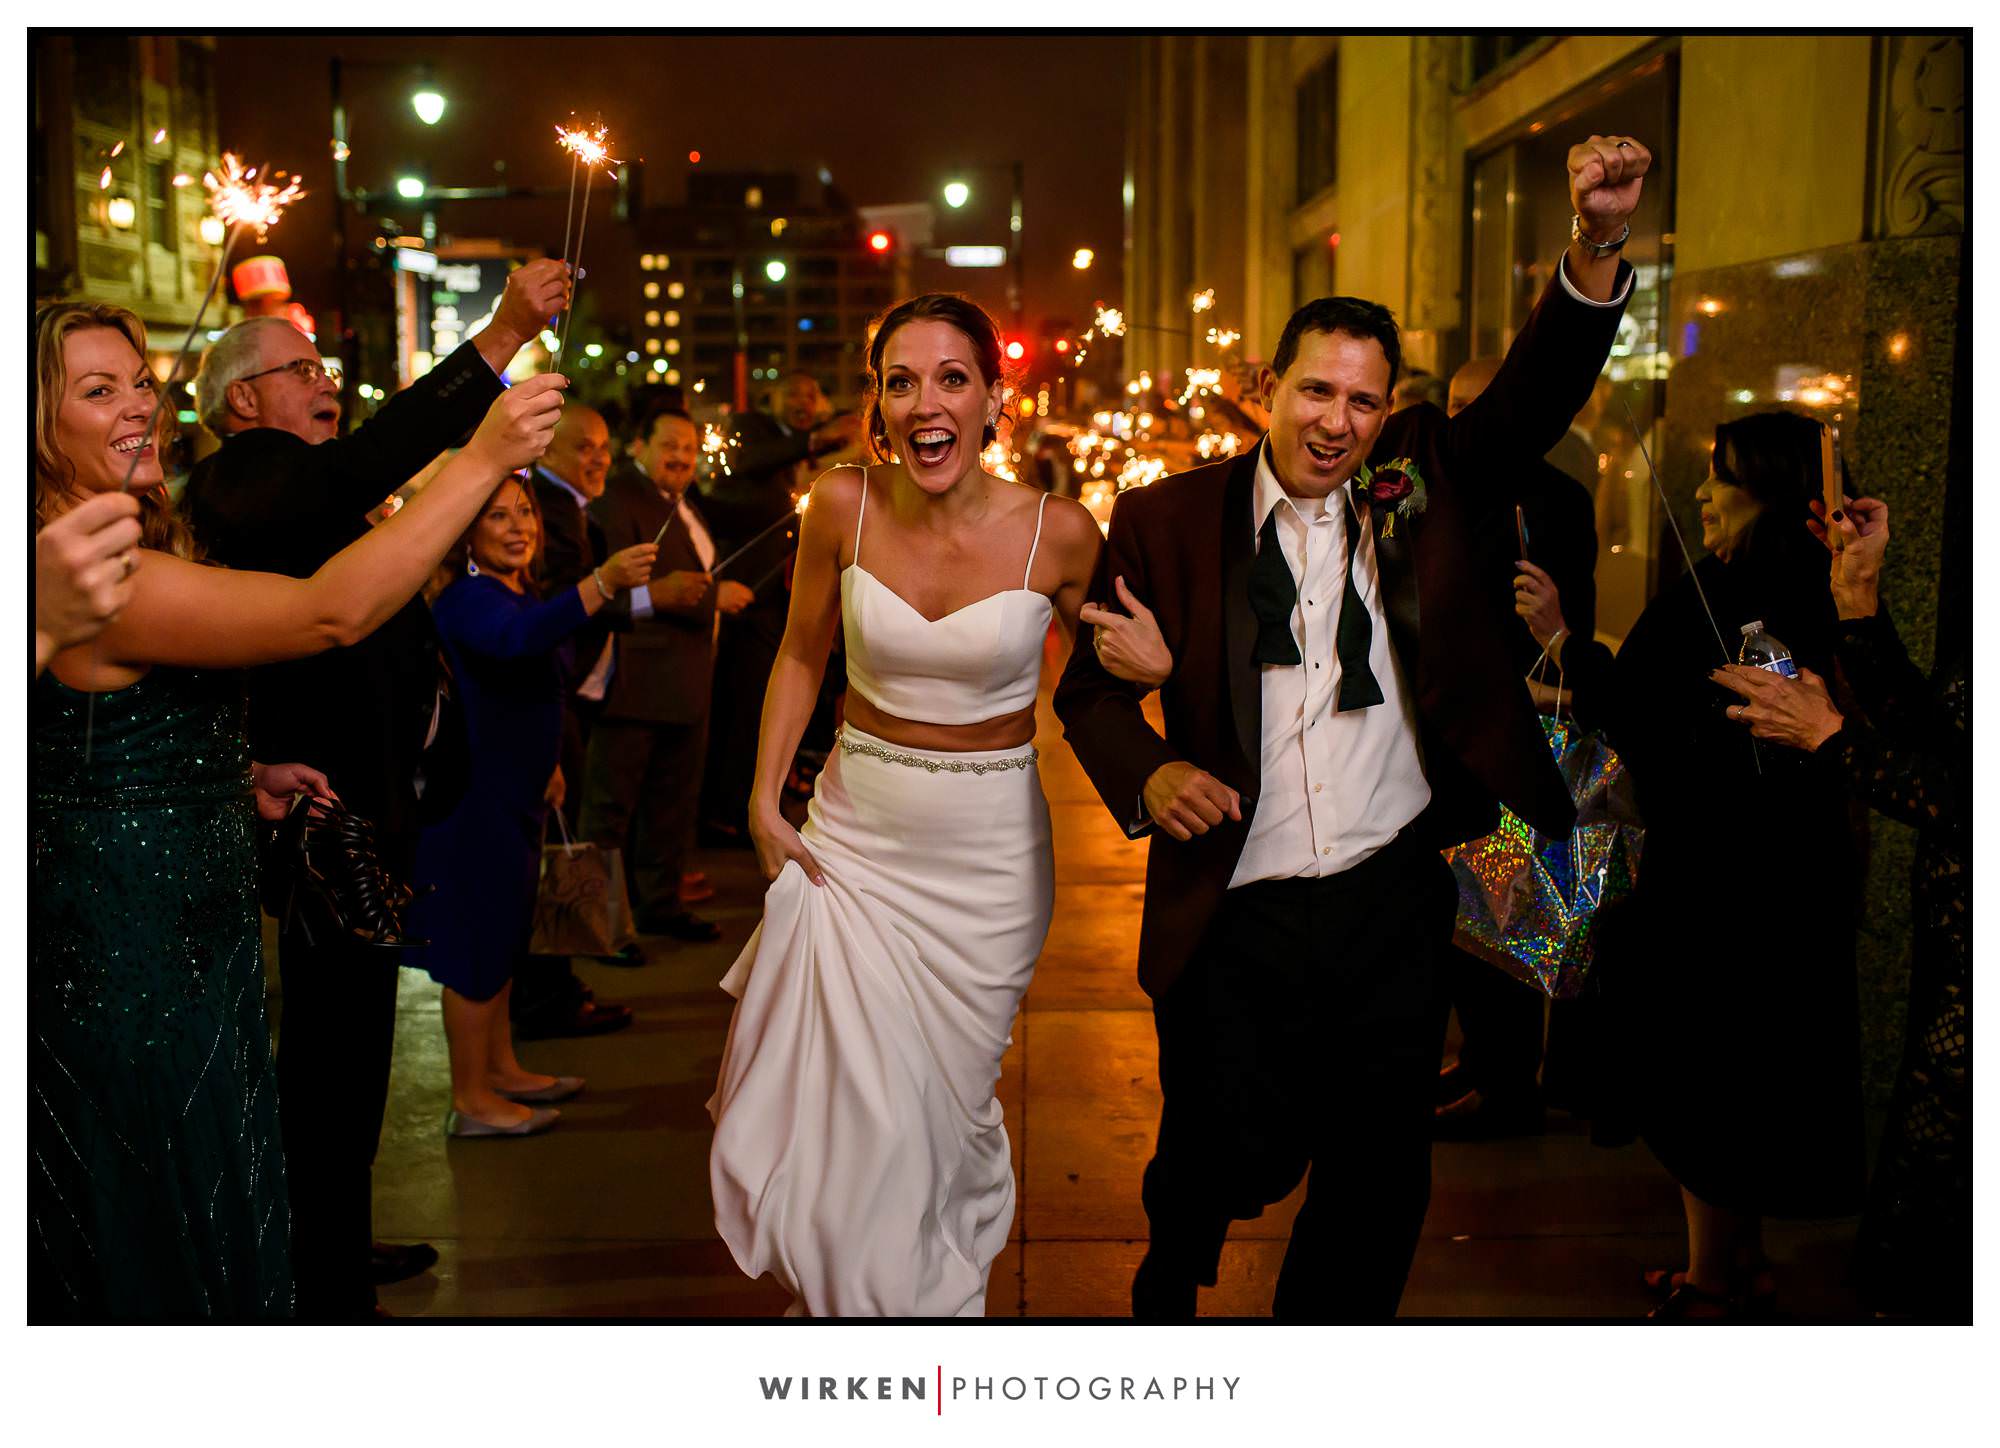 Bride and groom exit with sparklers after their Grand Hall wedding reception in Kansas City.